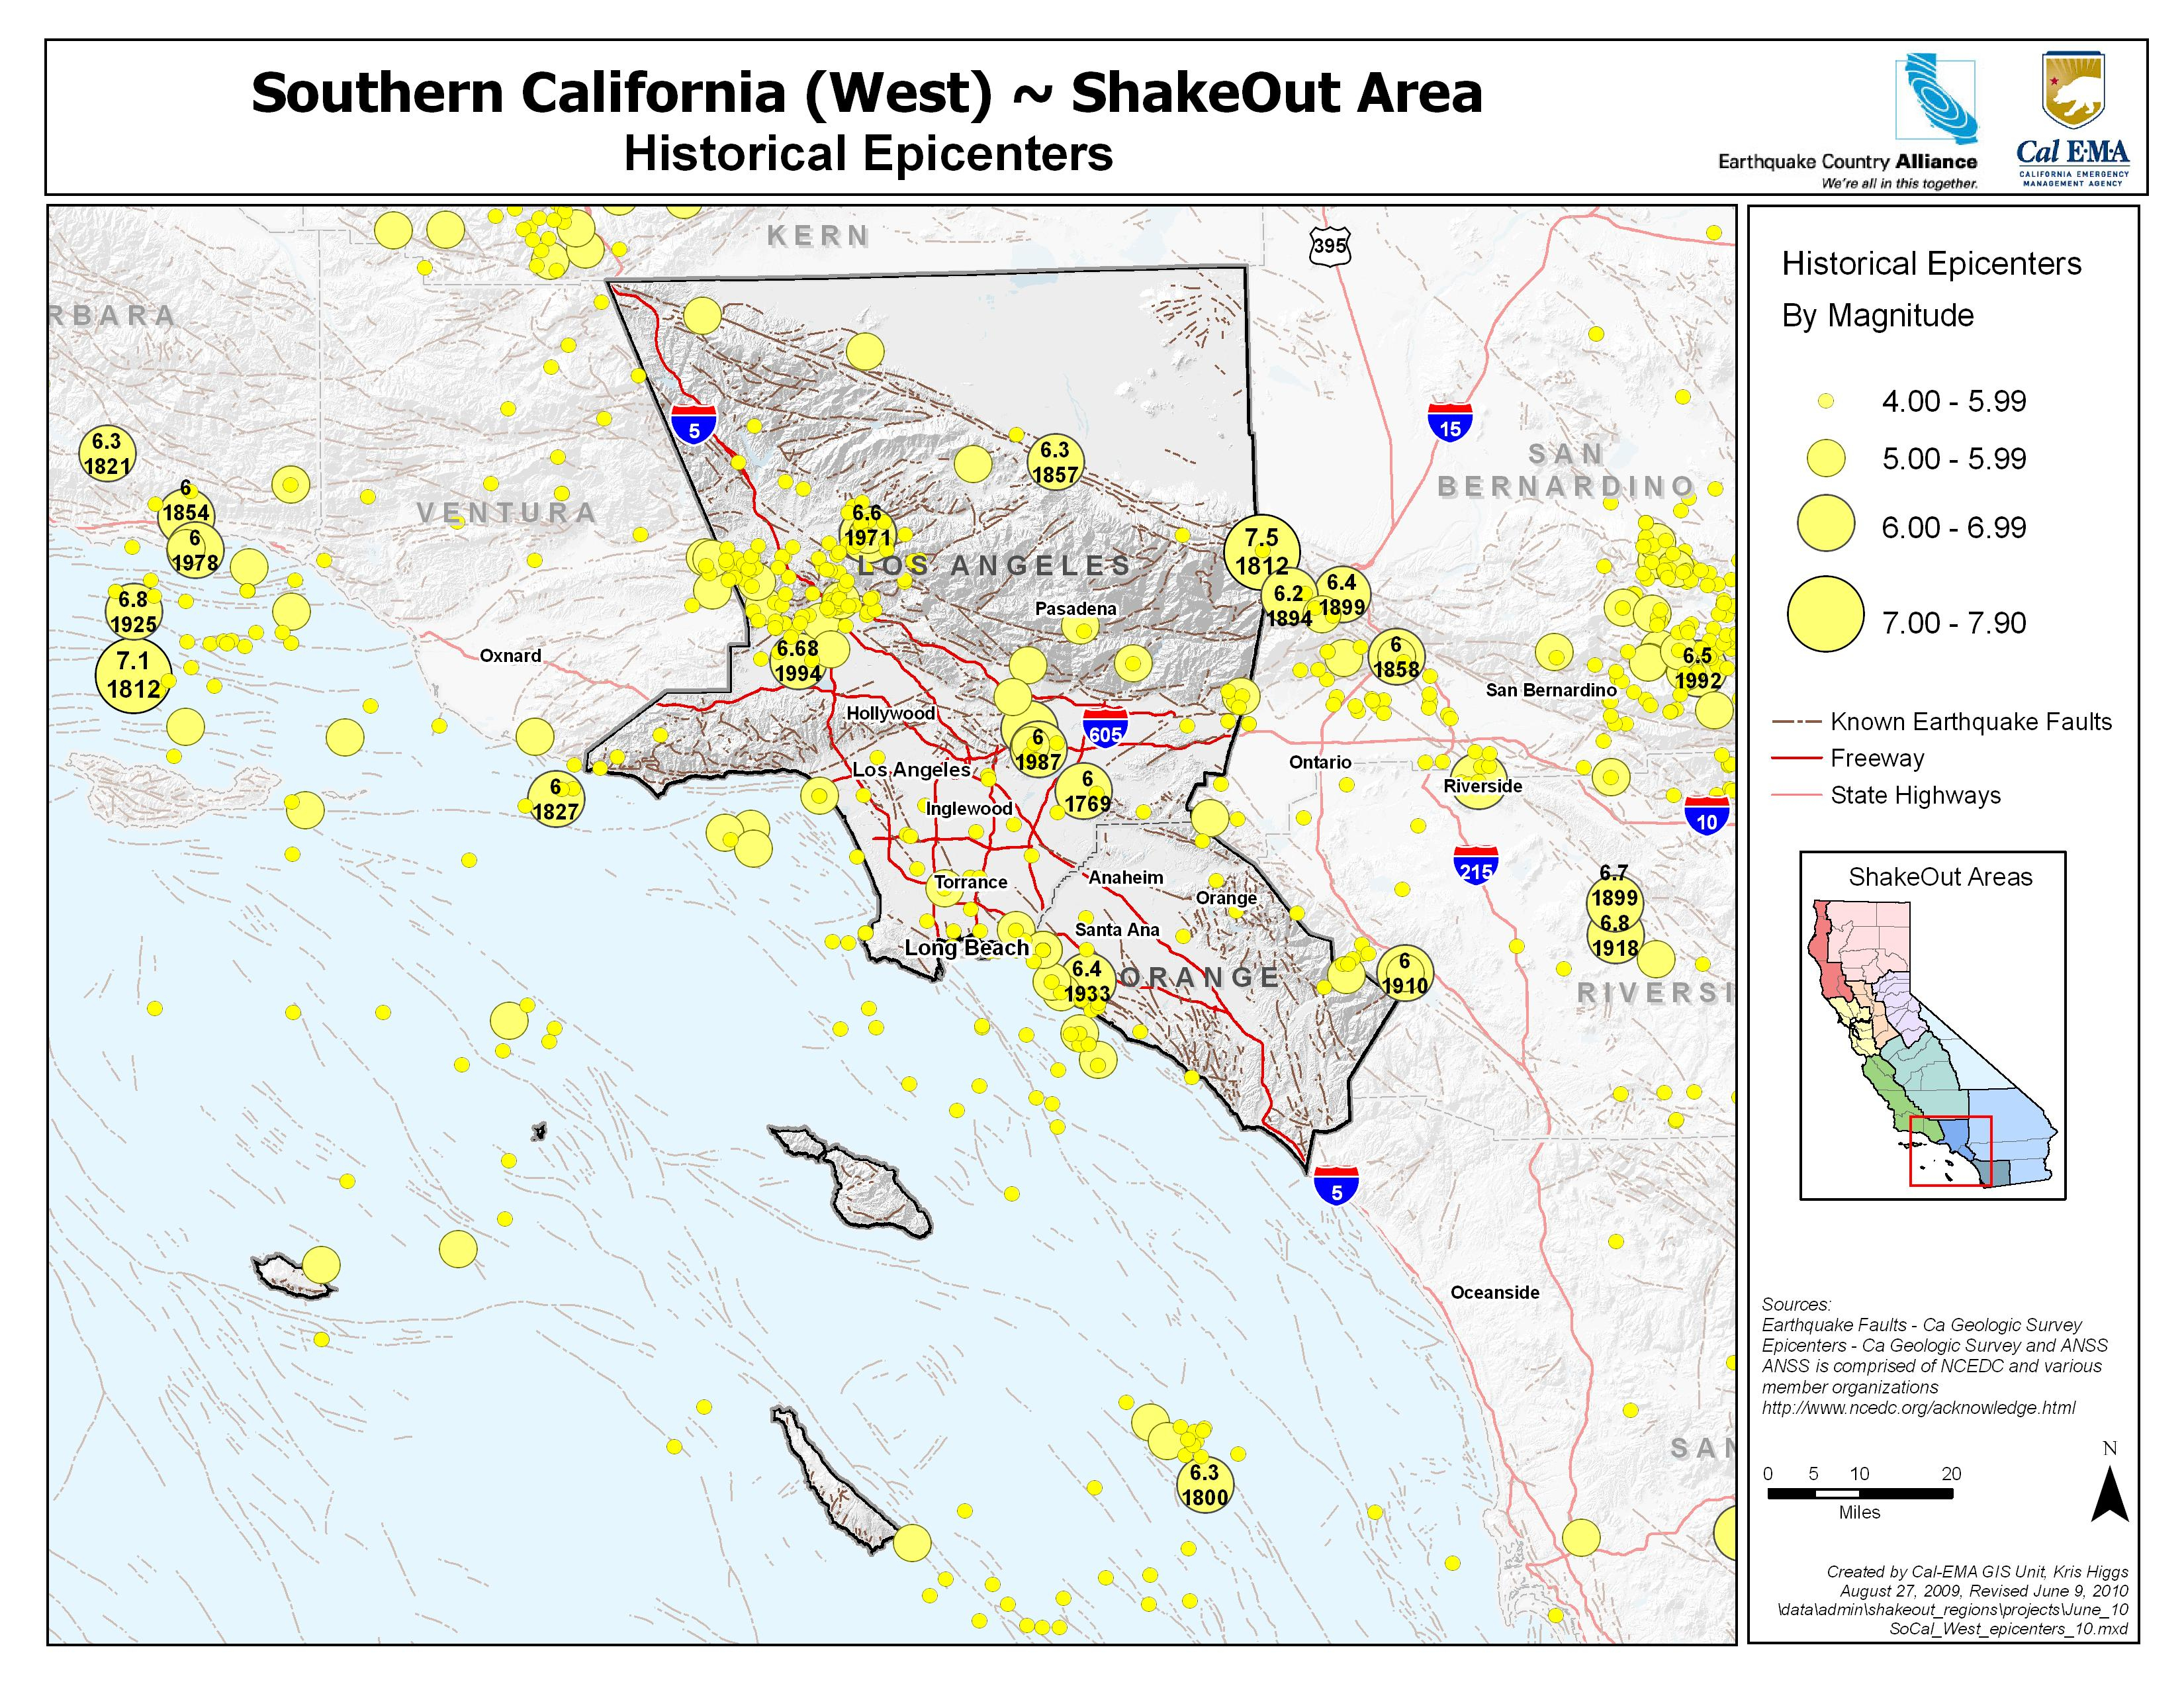 The Great California Shakeout - Southern California Coast Area - Southern California Earthquake Map